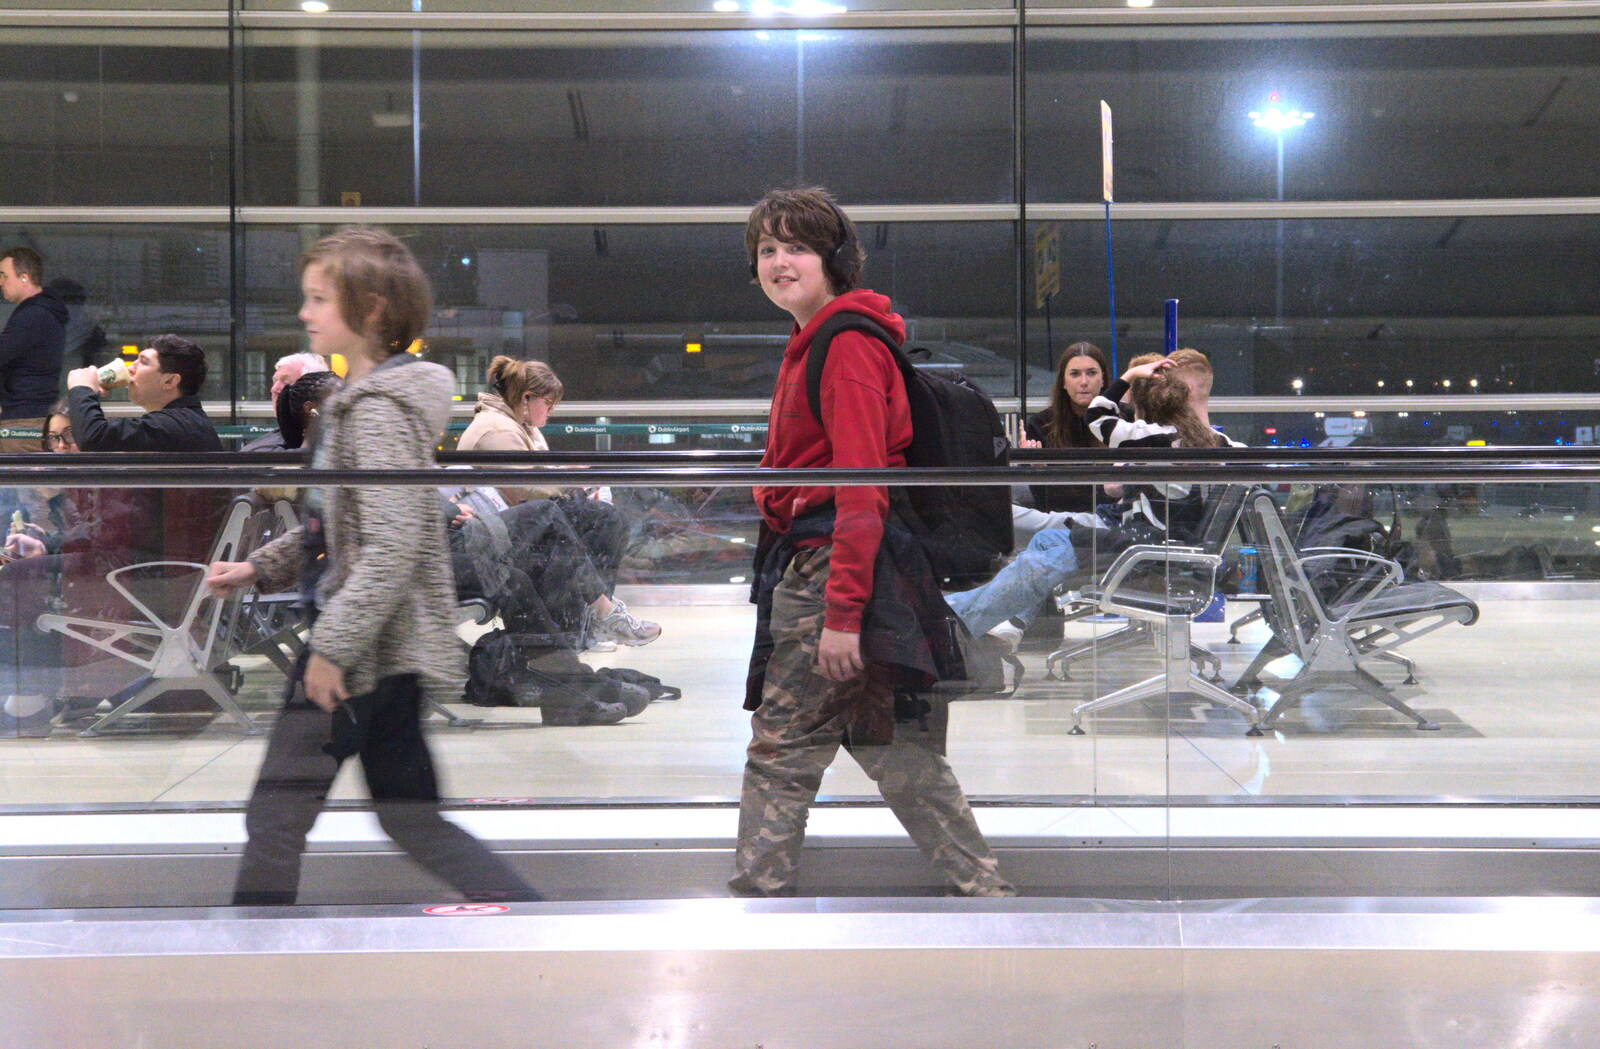 The End of the Breffni, Blackrock, Dublin - 18th February 2023: Harry and Fred go backwards on the travelator